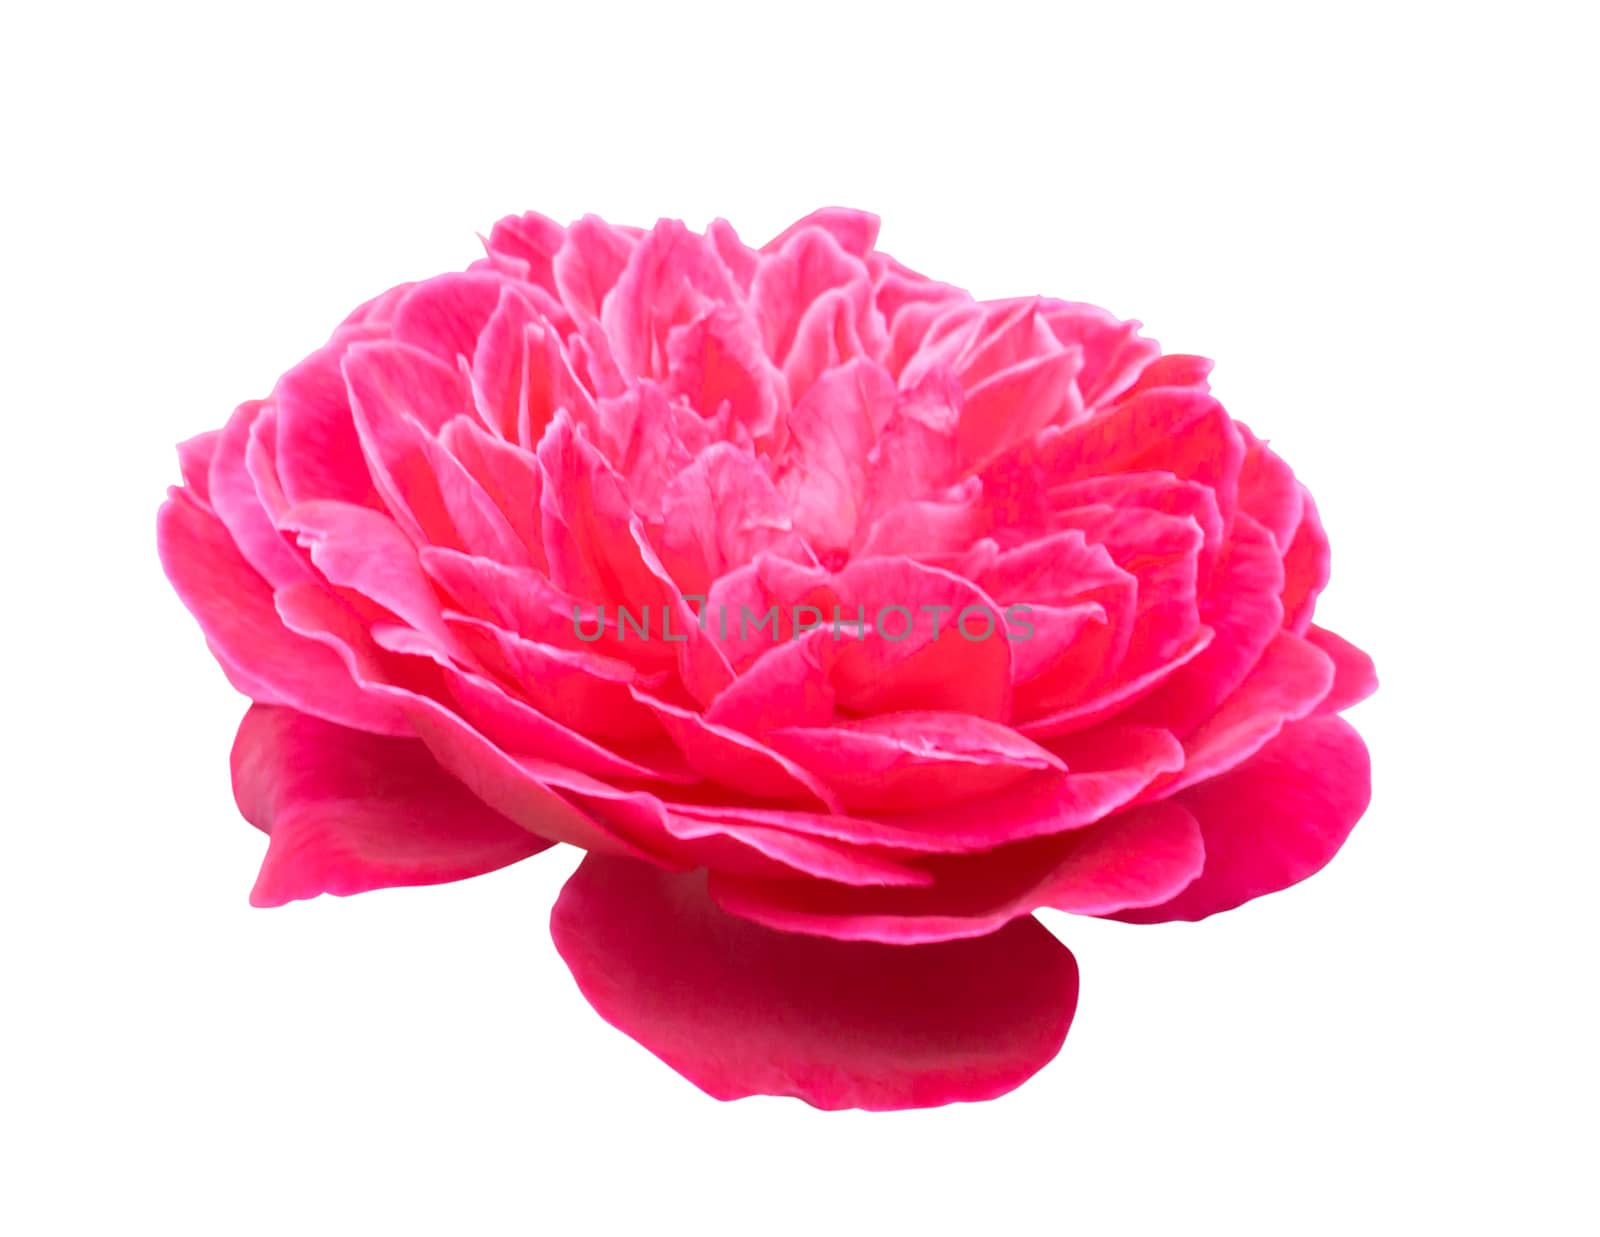 Beautiful sweet pink rose flower isolated on white background, l by pt.pongsak@gmail.com